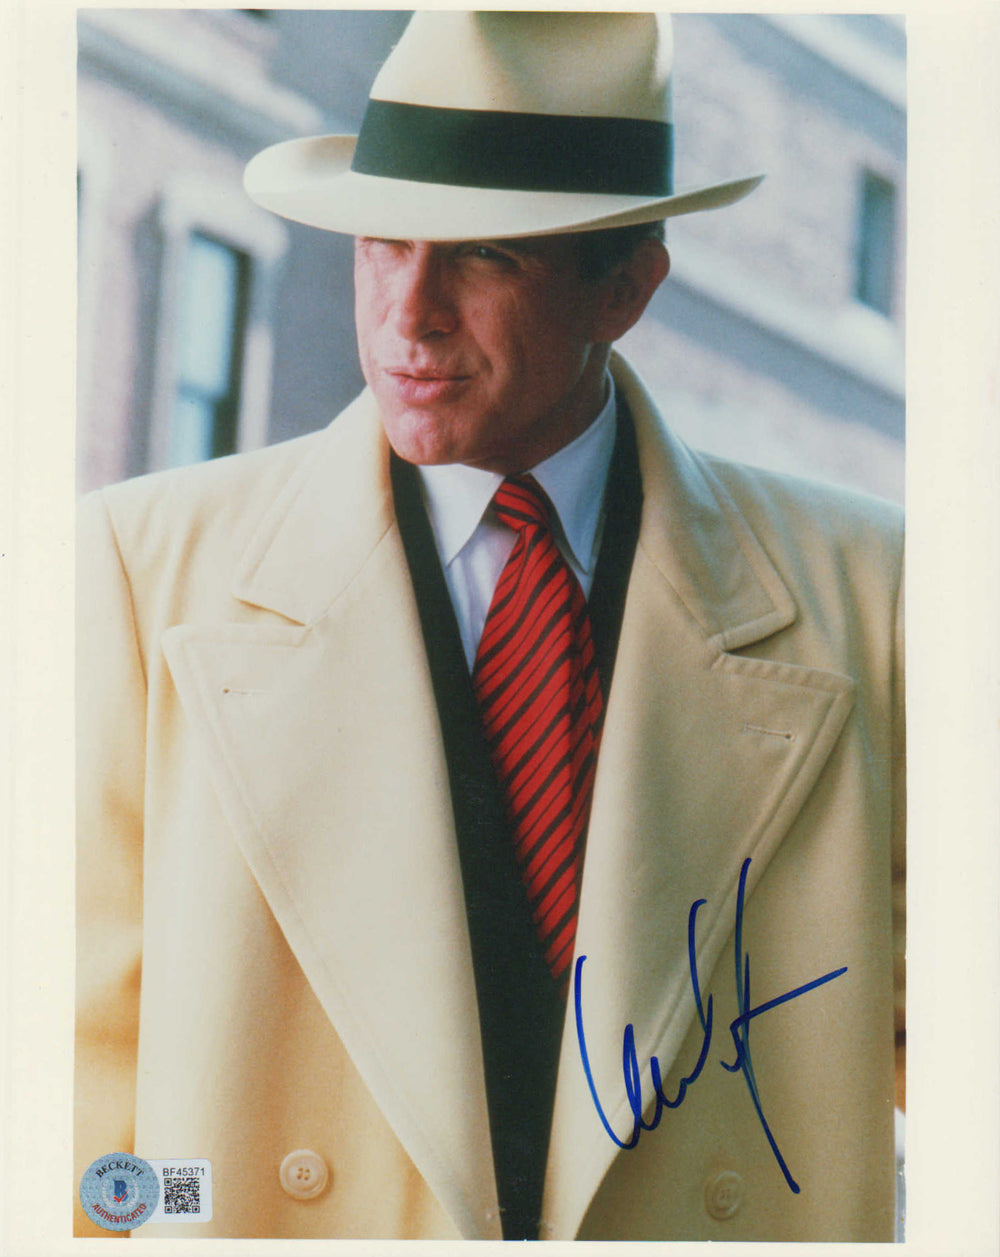 Warren Beatty as Dick Tracy in Dick Tracy (Beckett) Signed 8x10 Photo